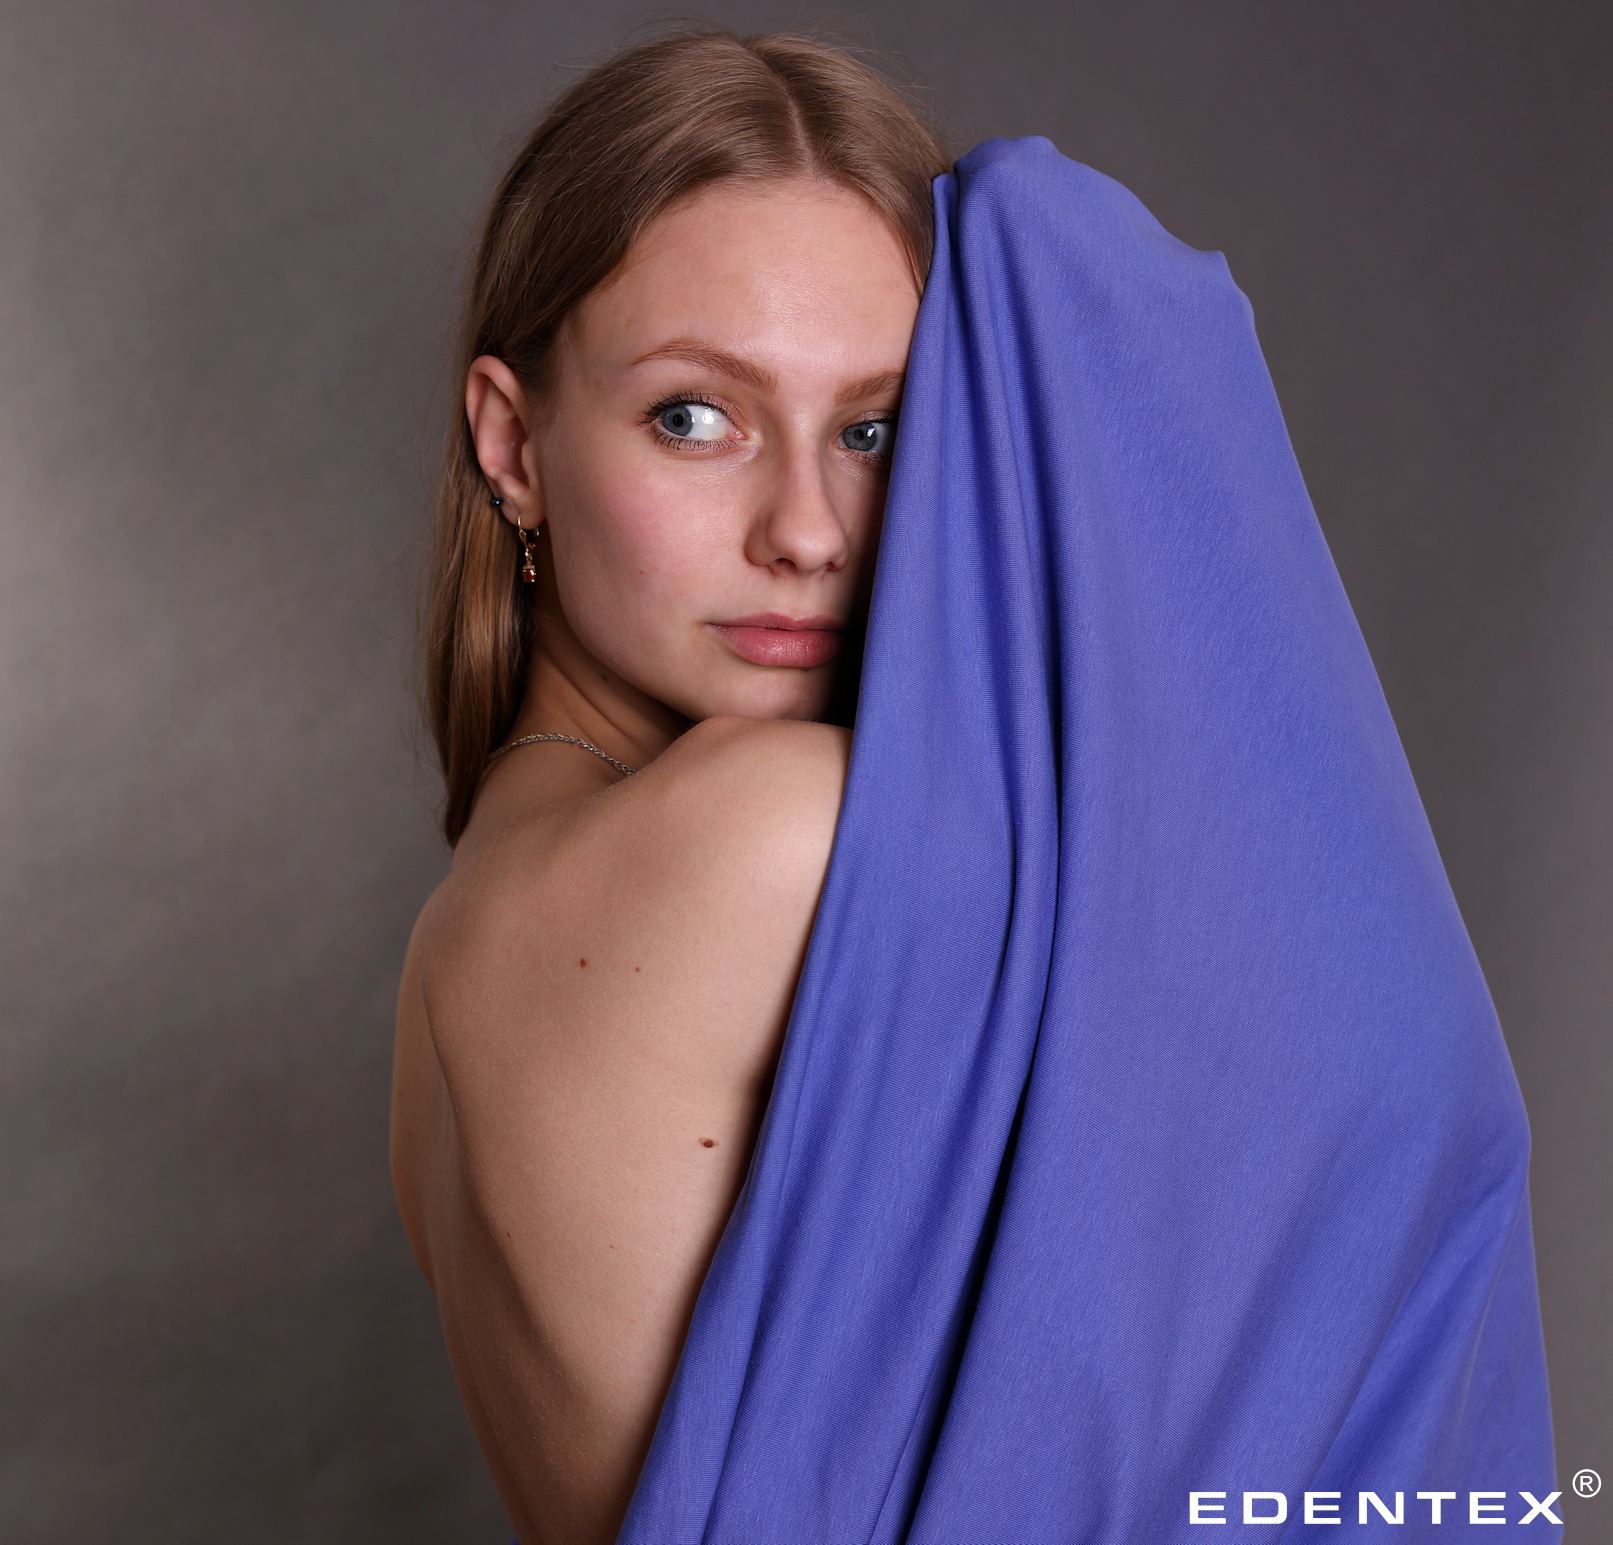 EDENTEX® is the value in every detail. Timeless beauty, love and elegance, softness and strength in one